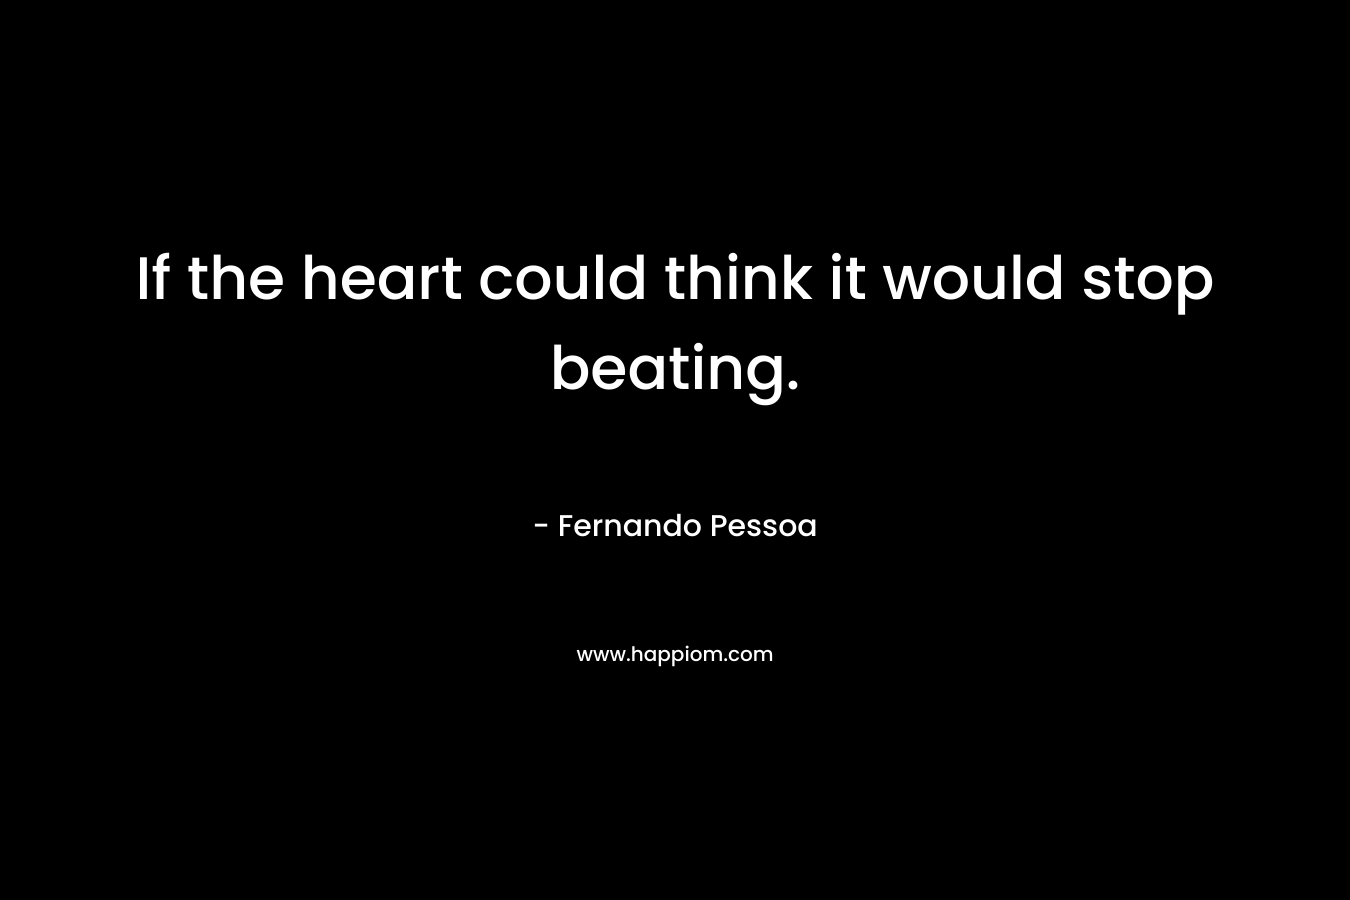 If the heart could think it would stop beating.